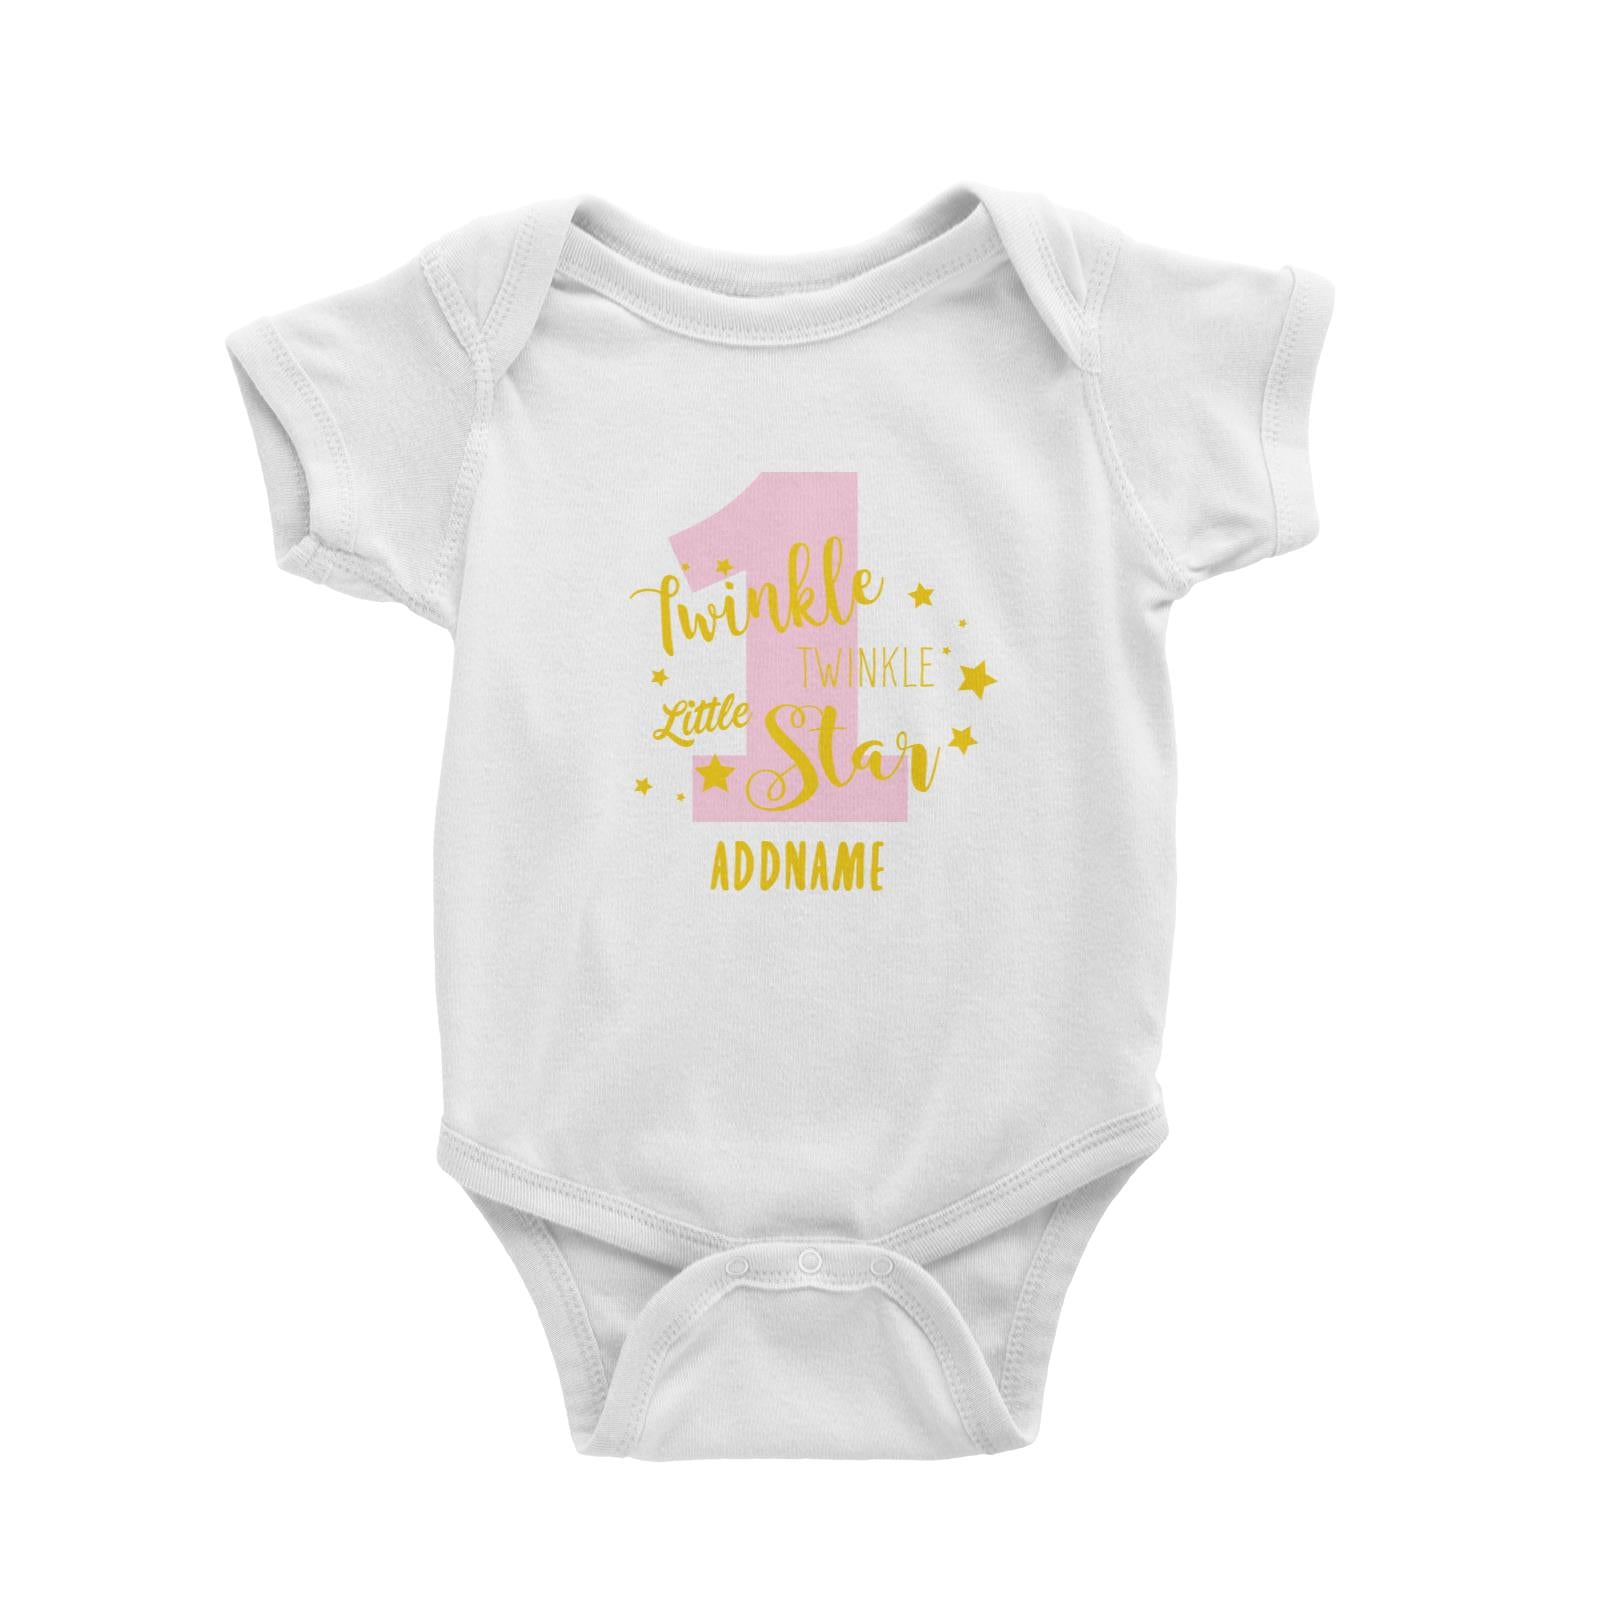 Twinkle Little Star with Pink One Addname Baby Romper Personalizable Designs Basic Newborn